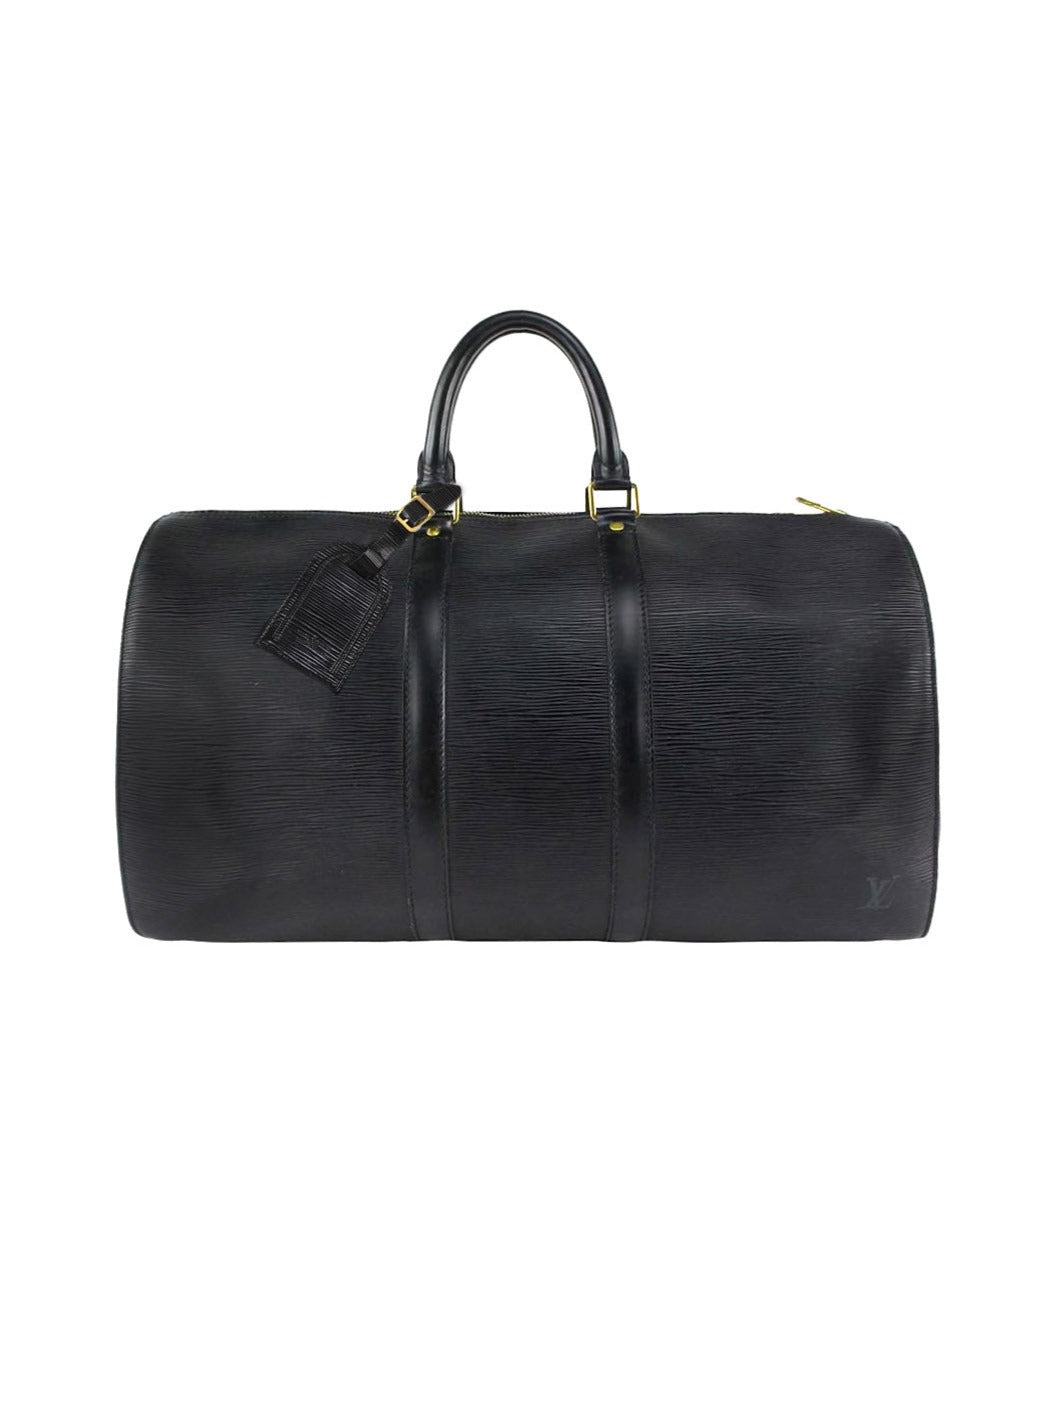 Grenelle leather handbag Louis Vuitton Black in Leather - 21493998